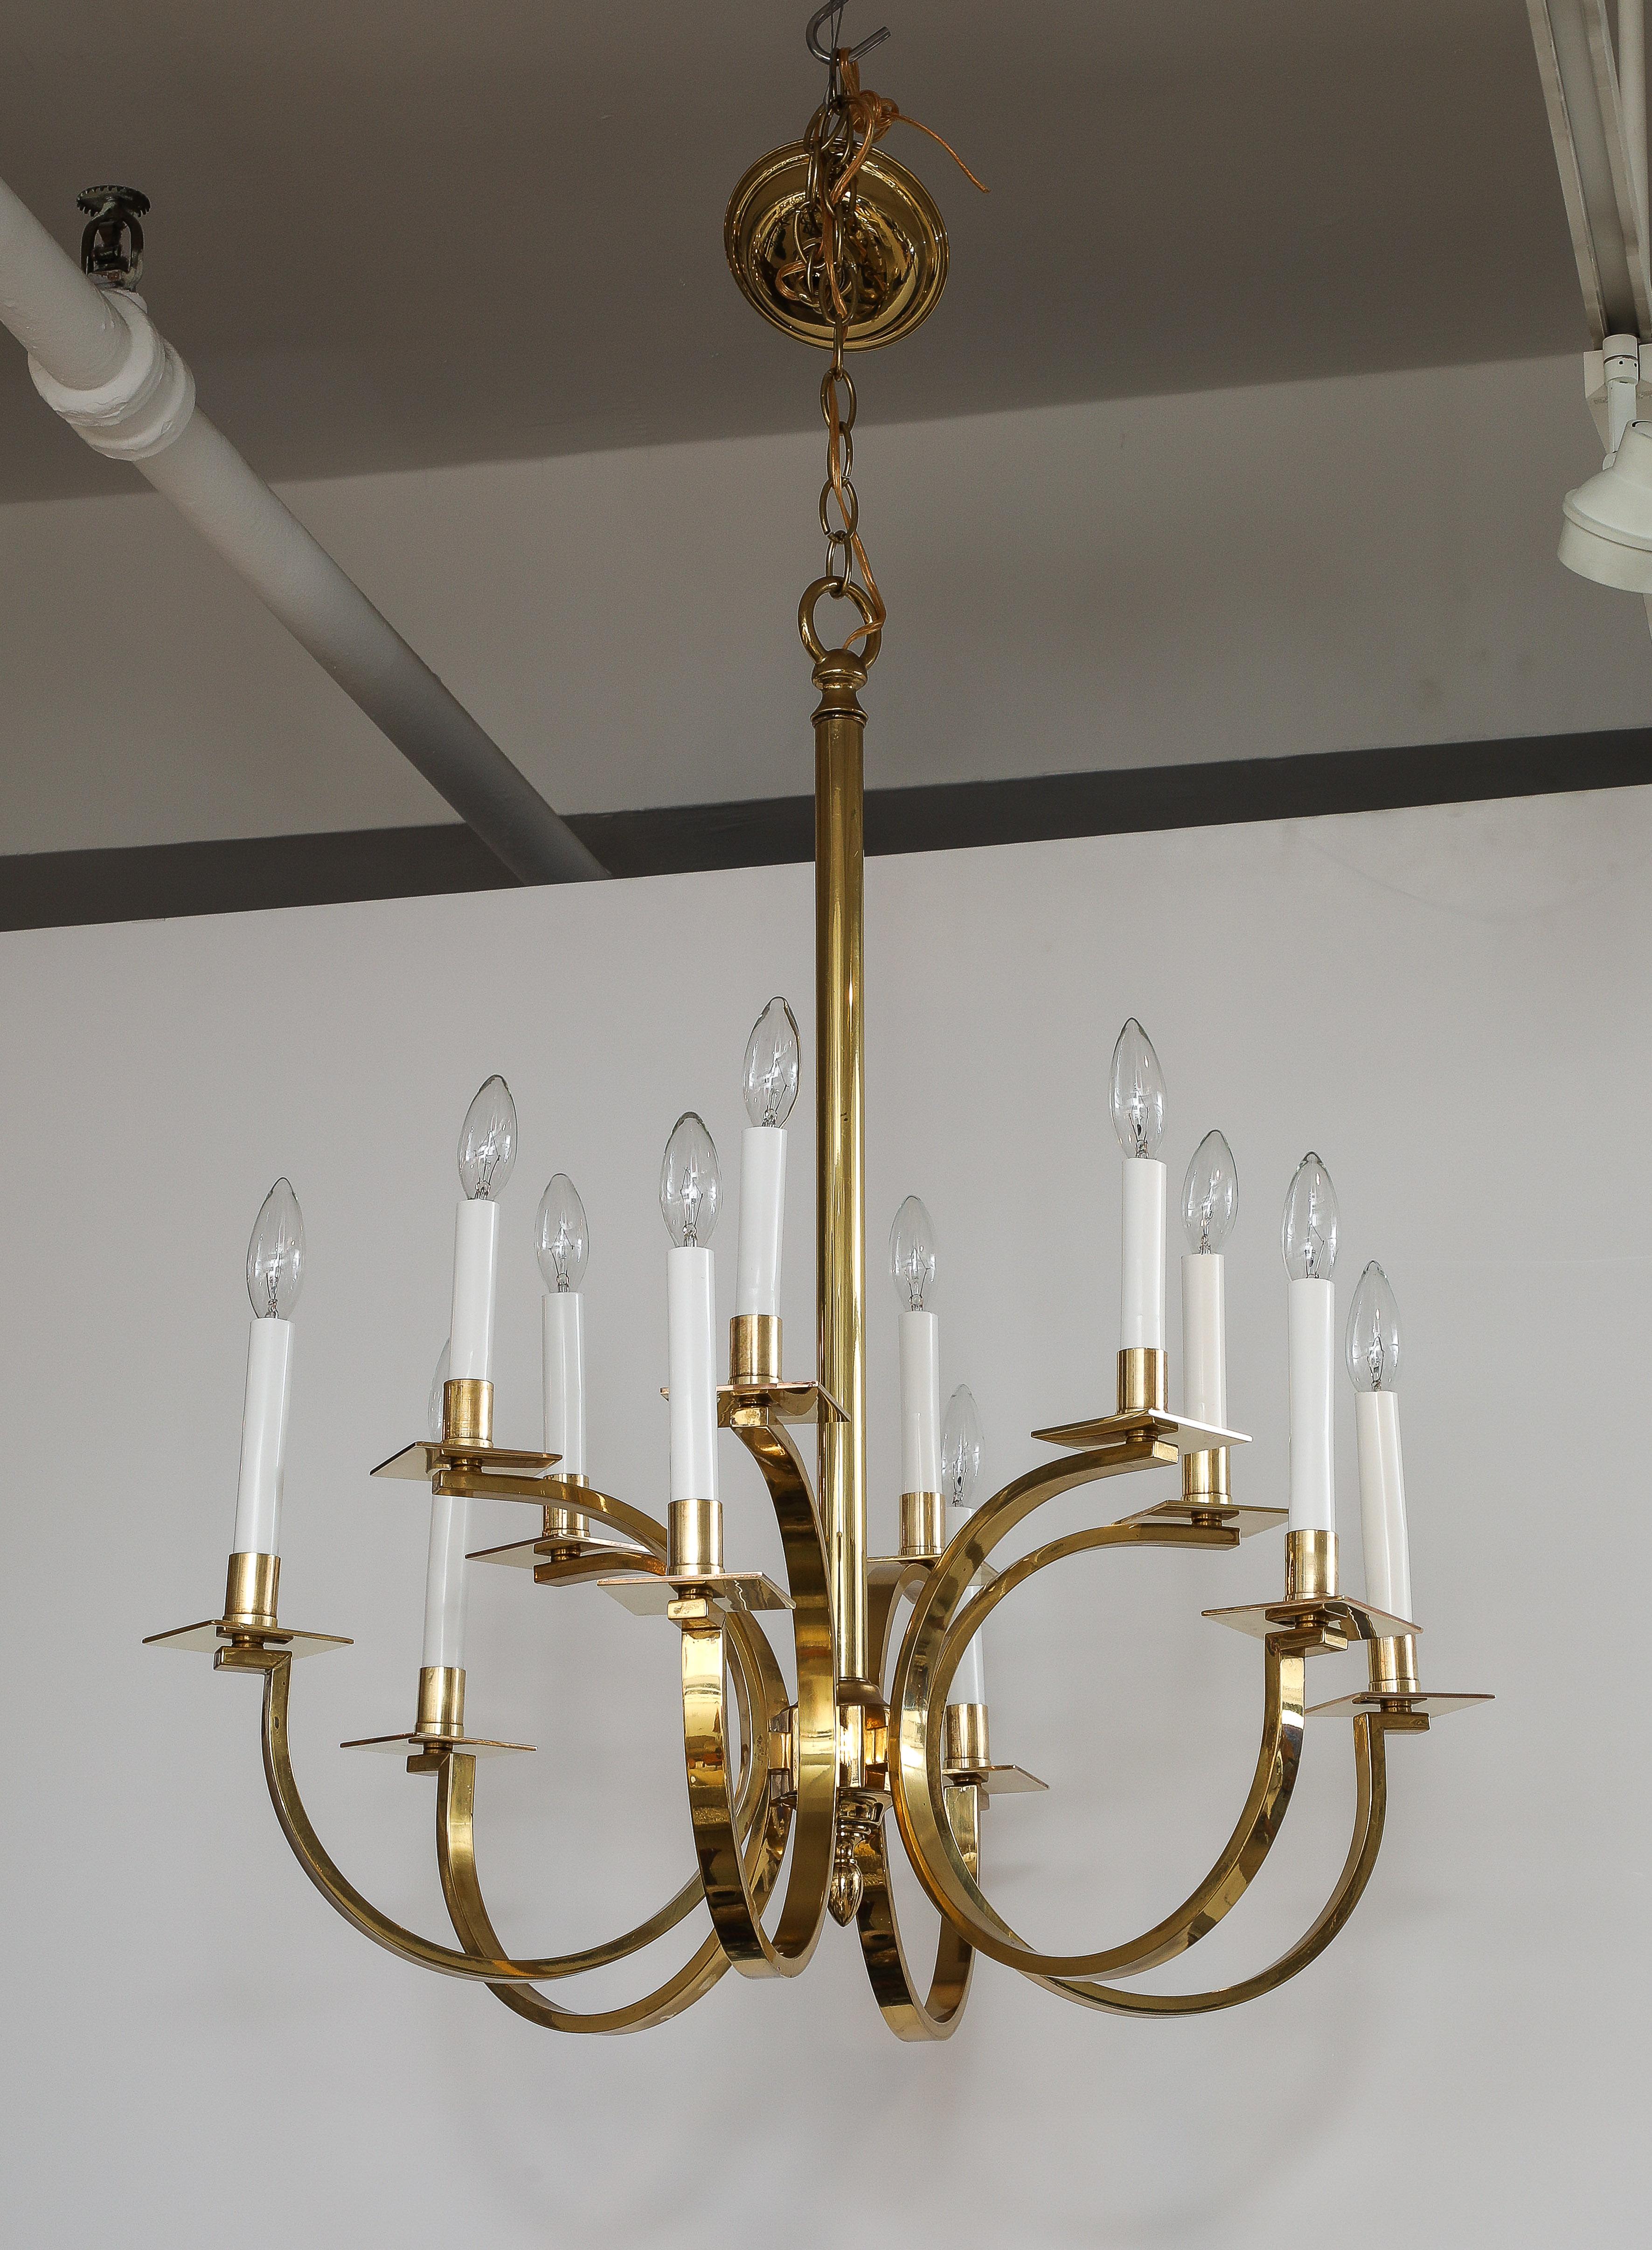 1970's mid-century modern 12 arm brass chandelier attributed to Gaetano Sciolari, newly rewired and ready to use, with some wear and patina to the brass due to age and use.